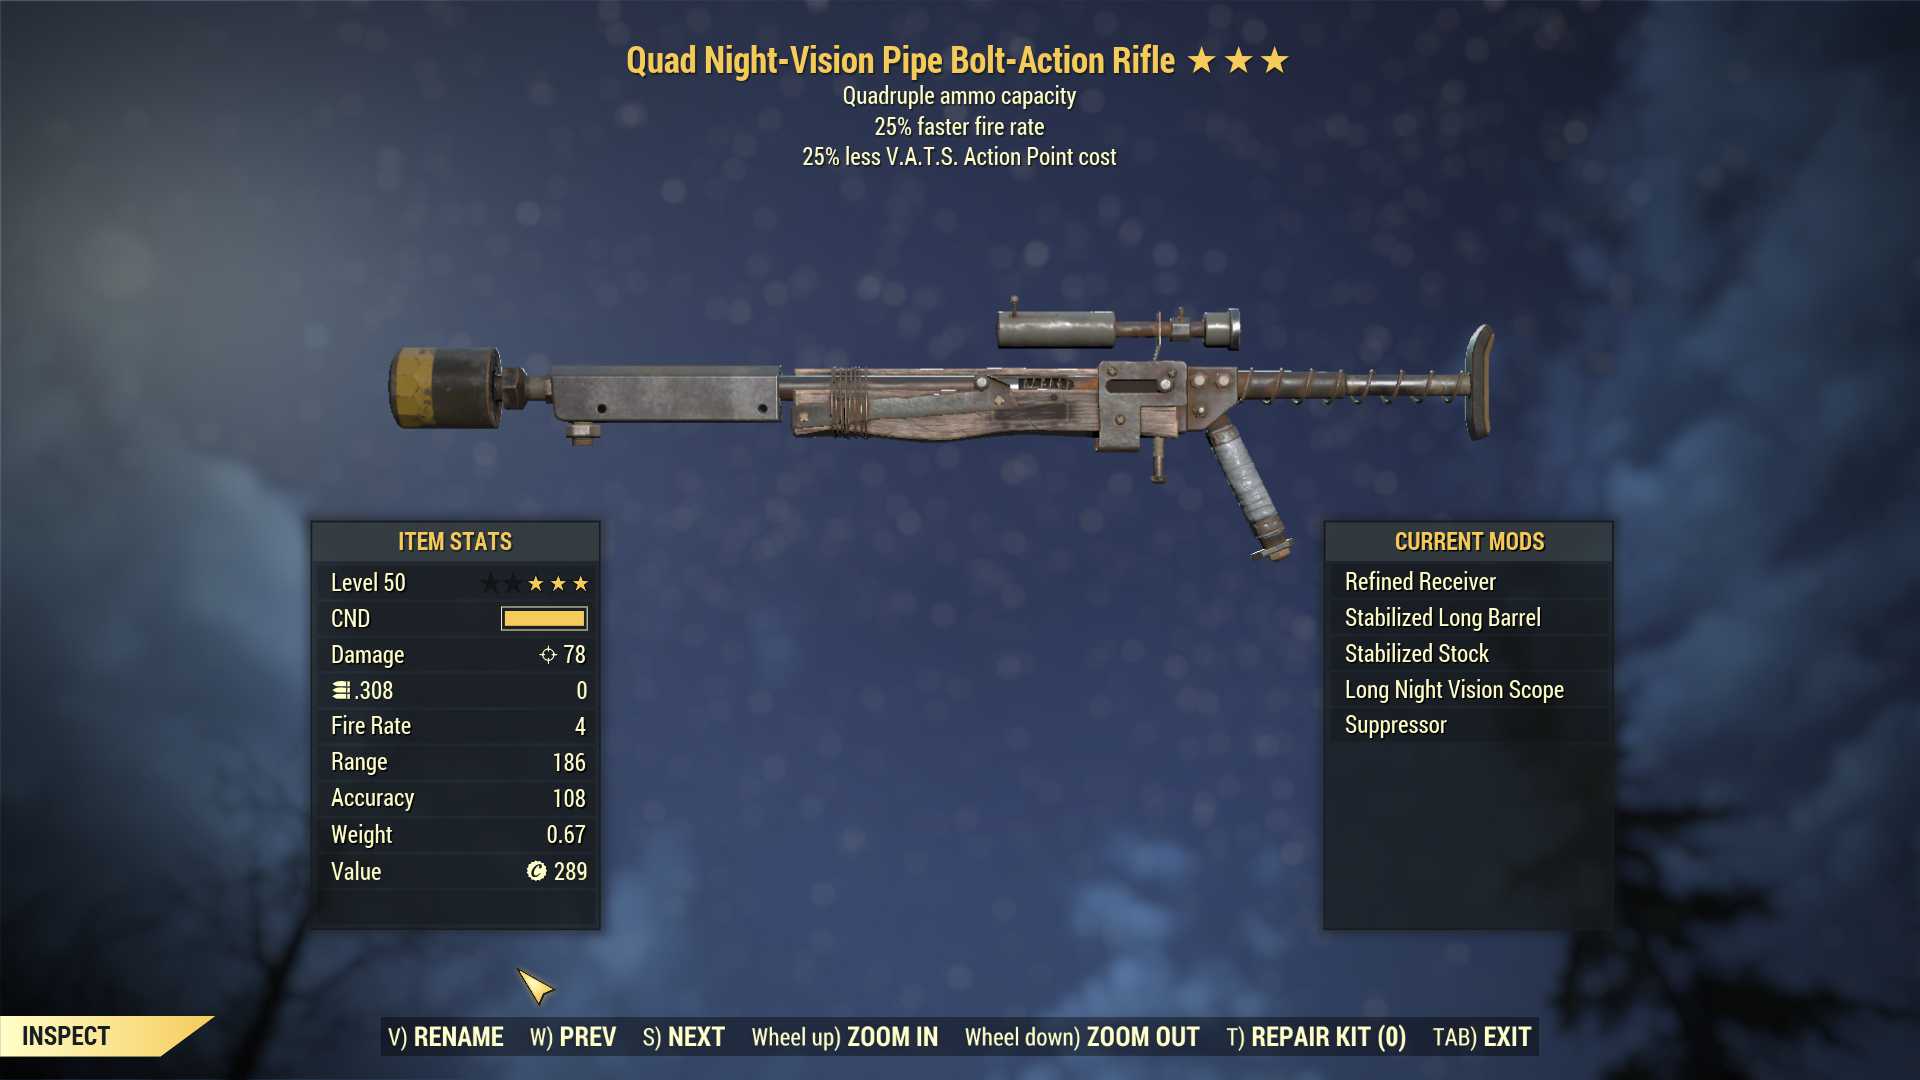 Quad Pipe Bolt-Action (25% faster fire rate, 25% less VATS AP cost)